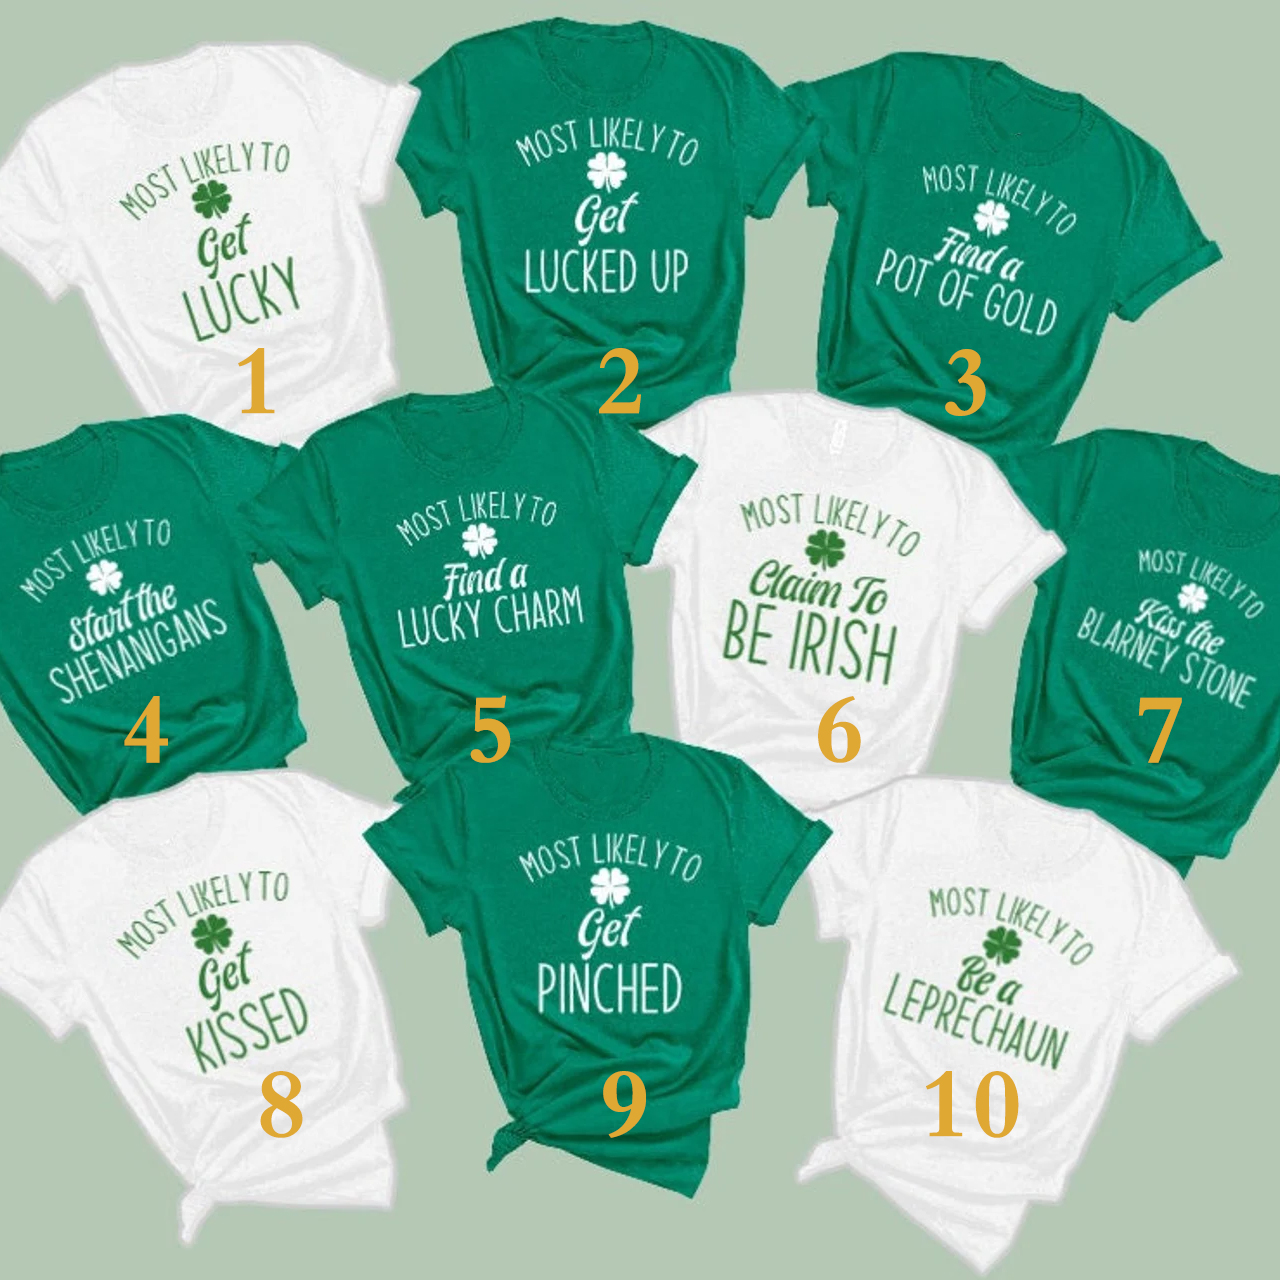 Most Likely Matching Shirts - St Patrick's Day